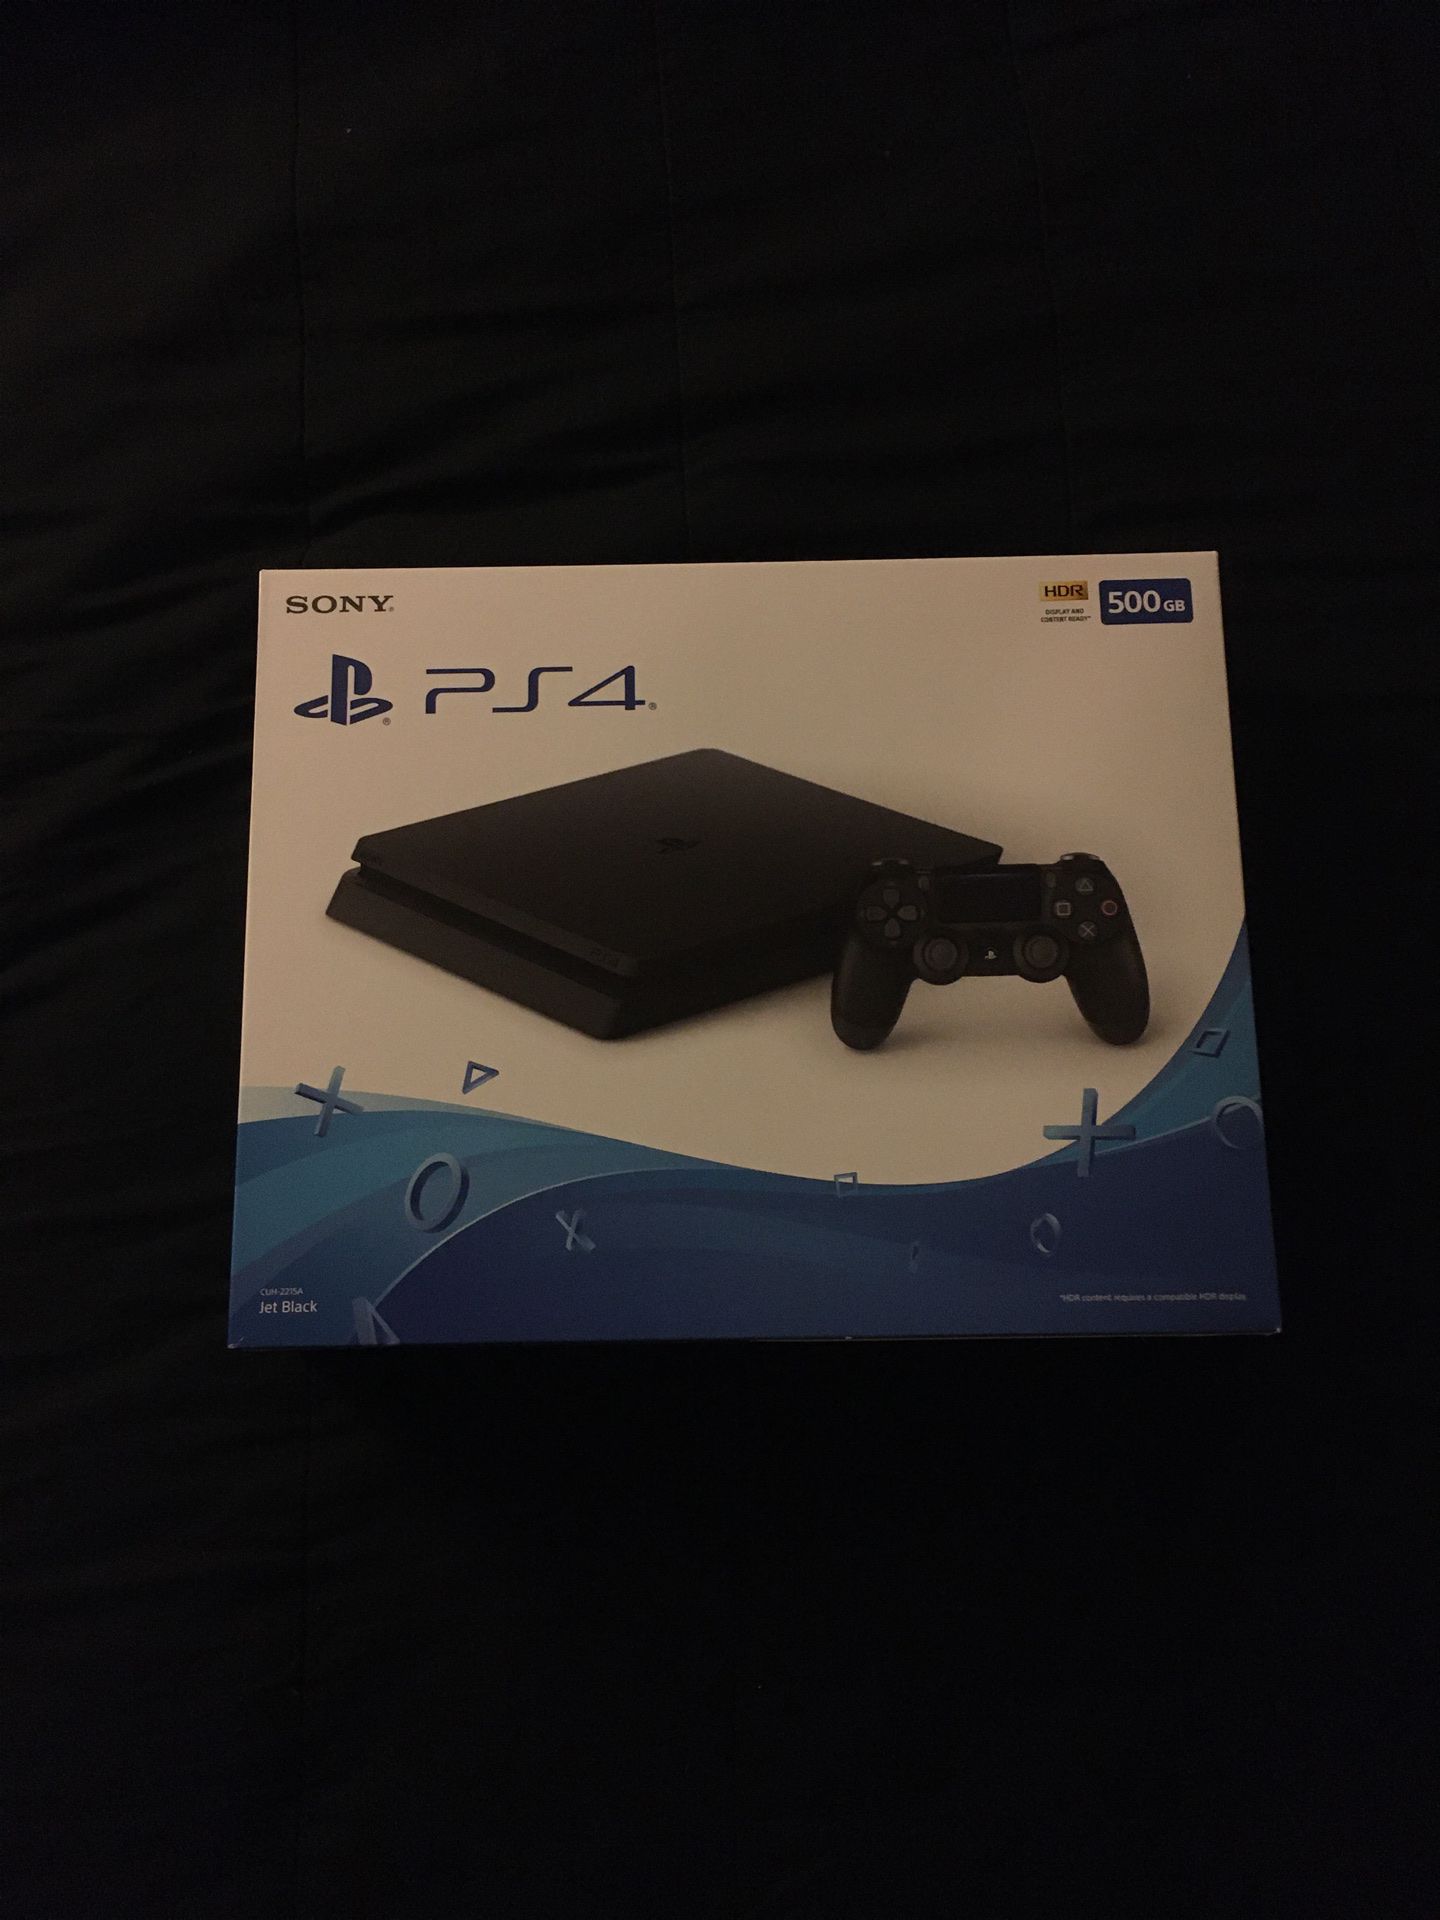 SONY PS4 SYSTEM Brand New (Factory Sealed)